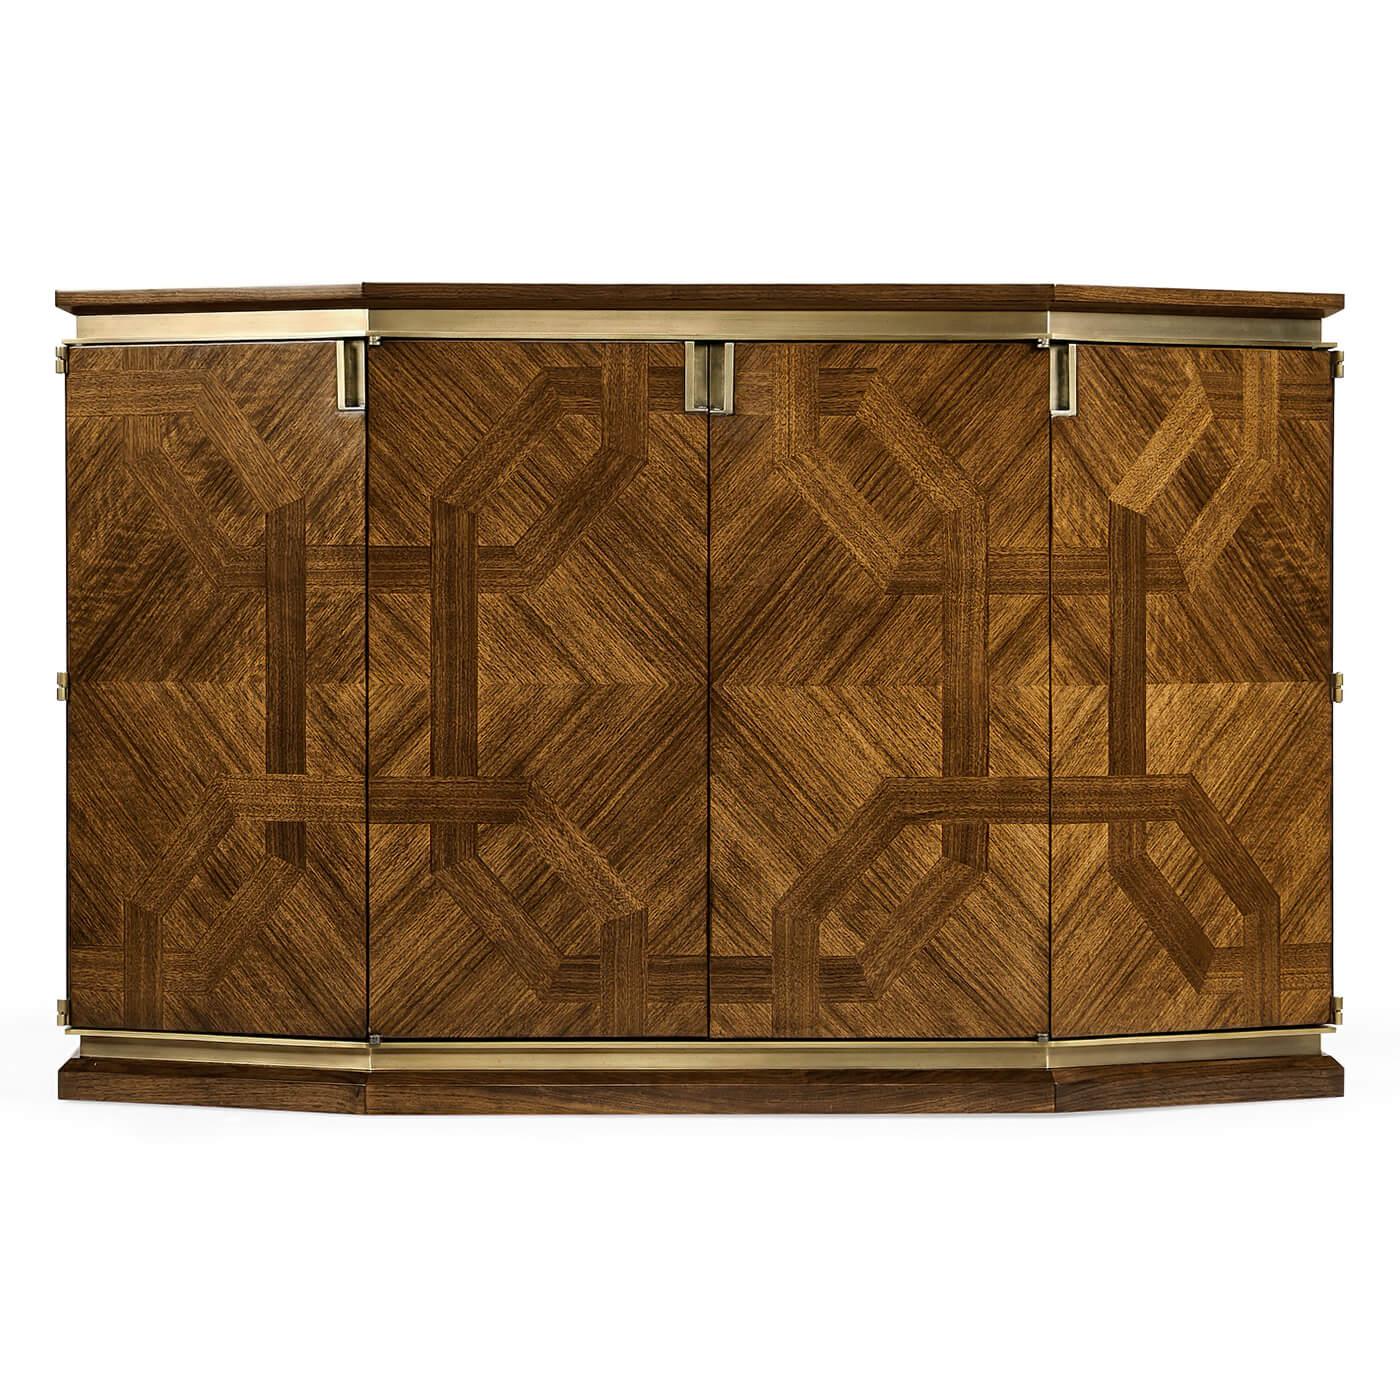 A mid century style buffet with an unlaid parquetry design. The sideboard cabinet is constricted of American walnut solids and veneers finished in a transparent lacquer. The hardware is cast from brass, acid dipped and hand-rubbed to achieve a rich,